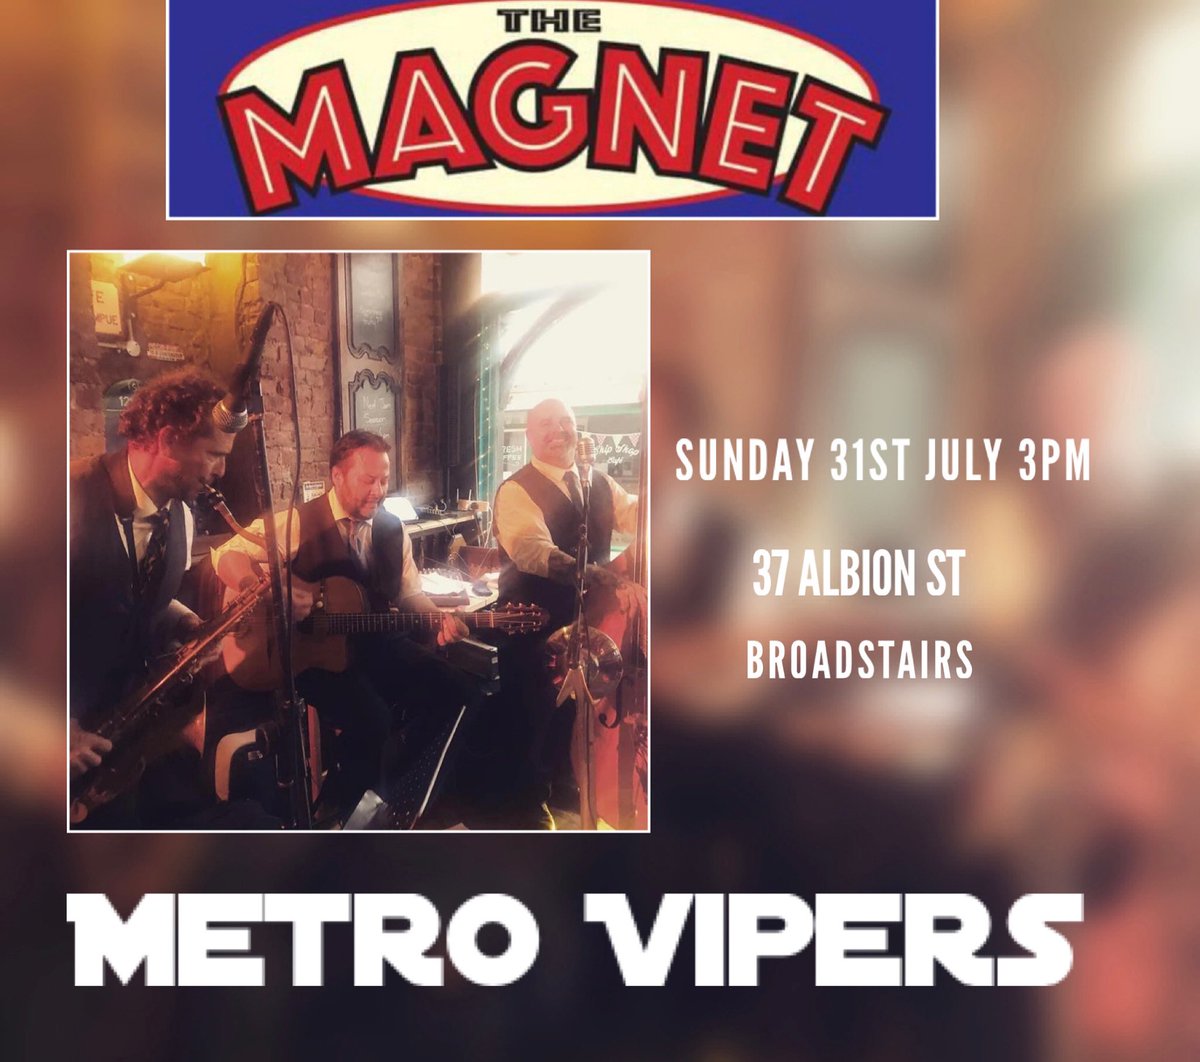 This Sunday 31st July at @Themagnetmicro1 in #Broadstairs from 3pm, we’ll be playing tunes that some of you may recognise but wish you hadn’t. #gypsyswing #rocknroll #gypsyjazz #swingjazz #kent #acousticguitar #doublebass #clarinet #saxophone #vocalharmony #broadstairskent